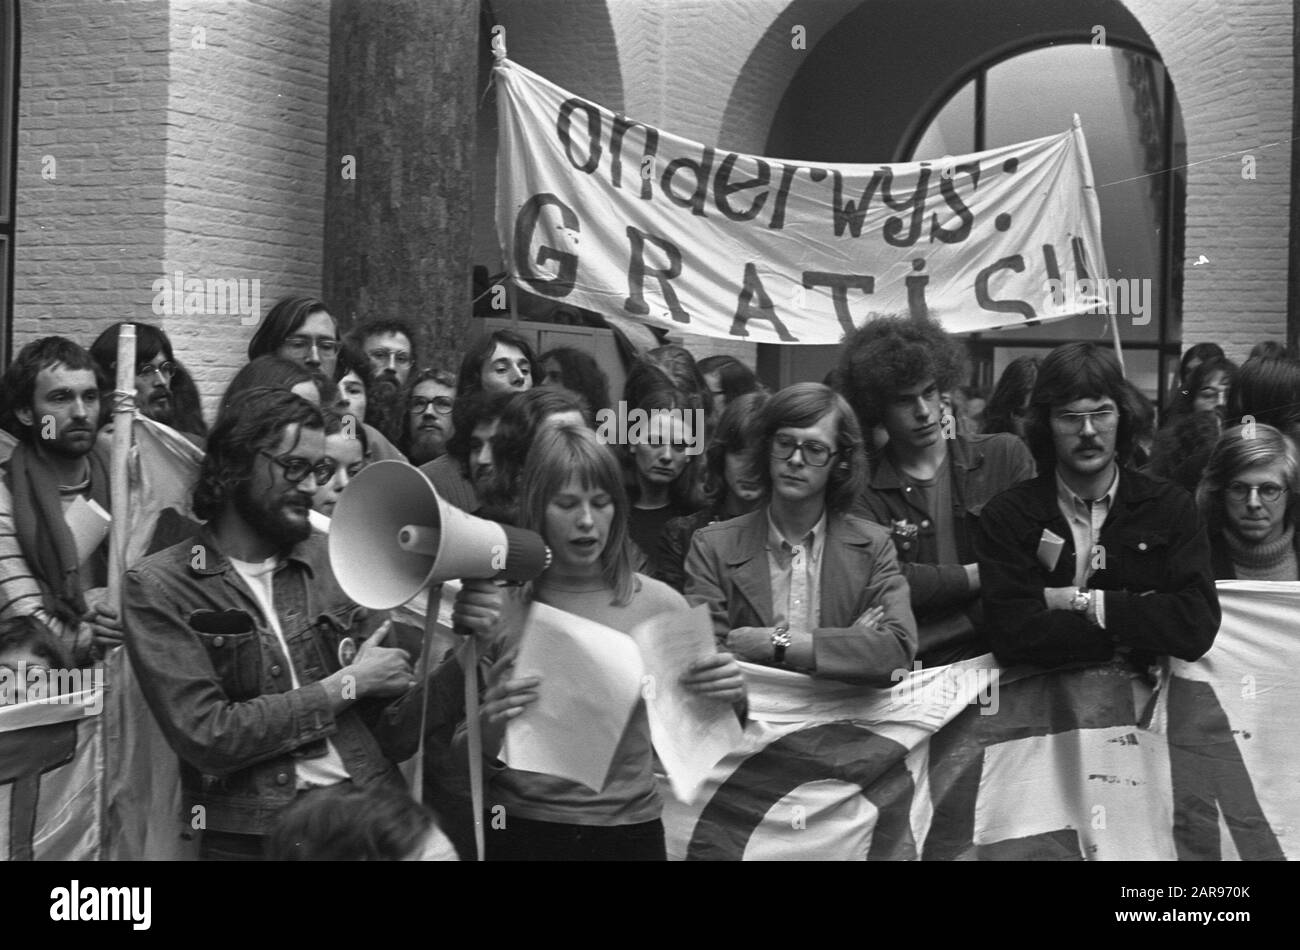 Vg. Universiteitsraad.G.U. A'dam in Maagdenhuis where occupiers of registration office are present, Cylia Galensloot reads statement for Date: 20 February 1973 Location: Amsterdam, Noord-Holland Keywords: Registration offices, Meetings, occupations, declarations Institutional name: Magdenhuis Stock Photo